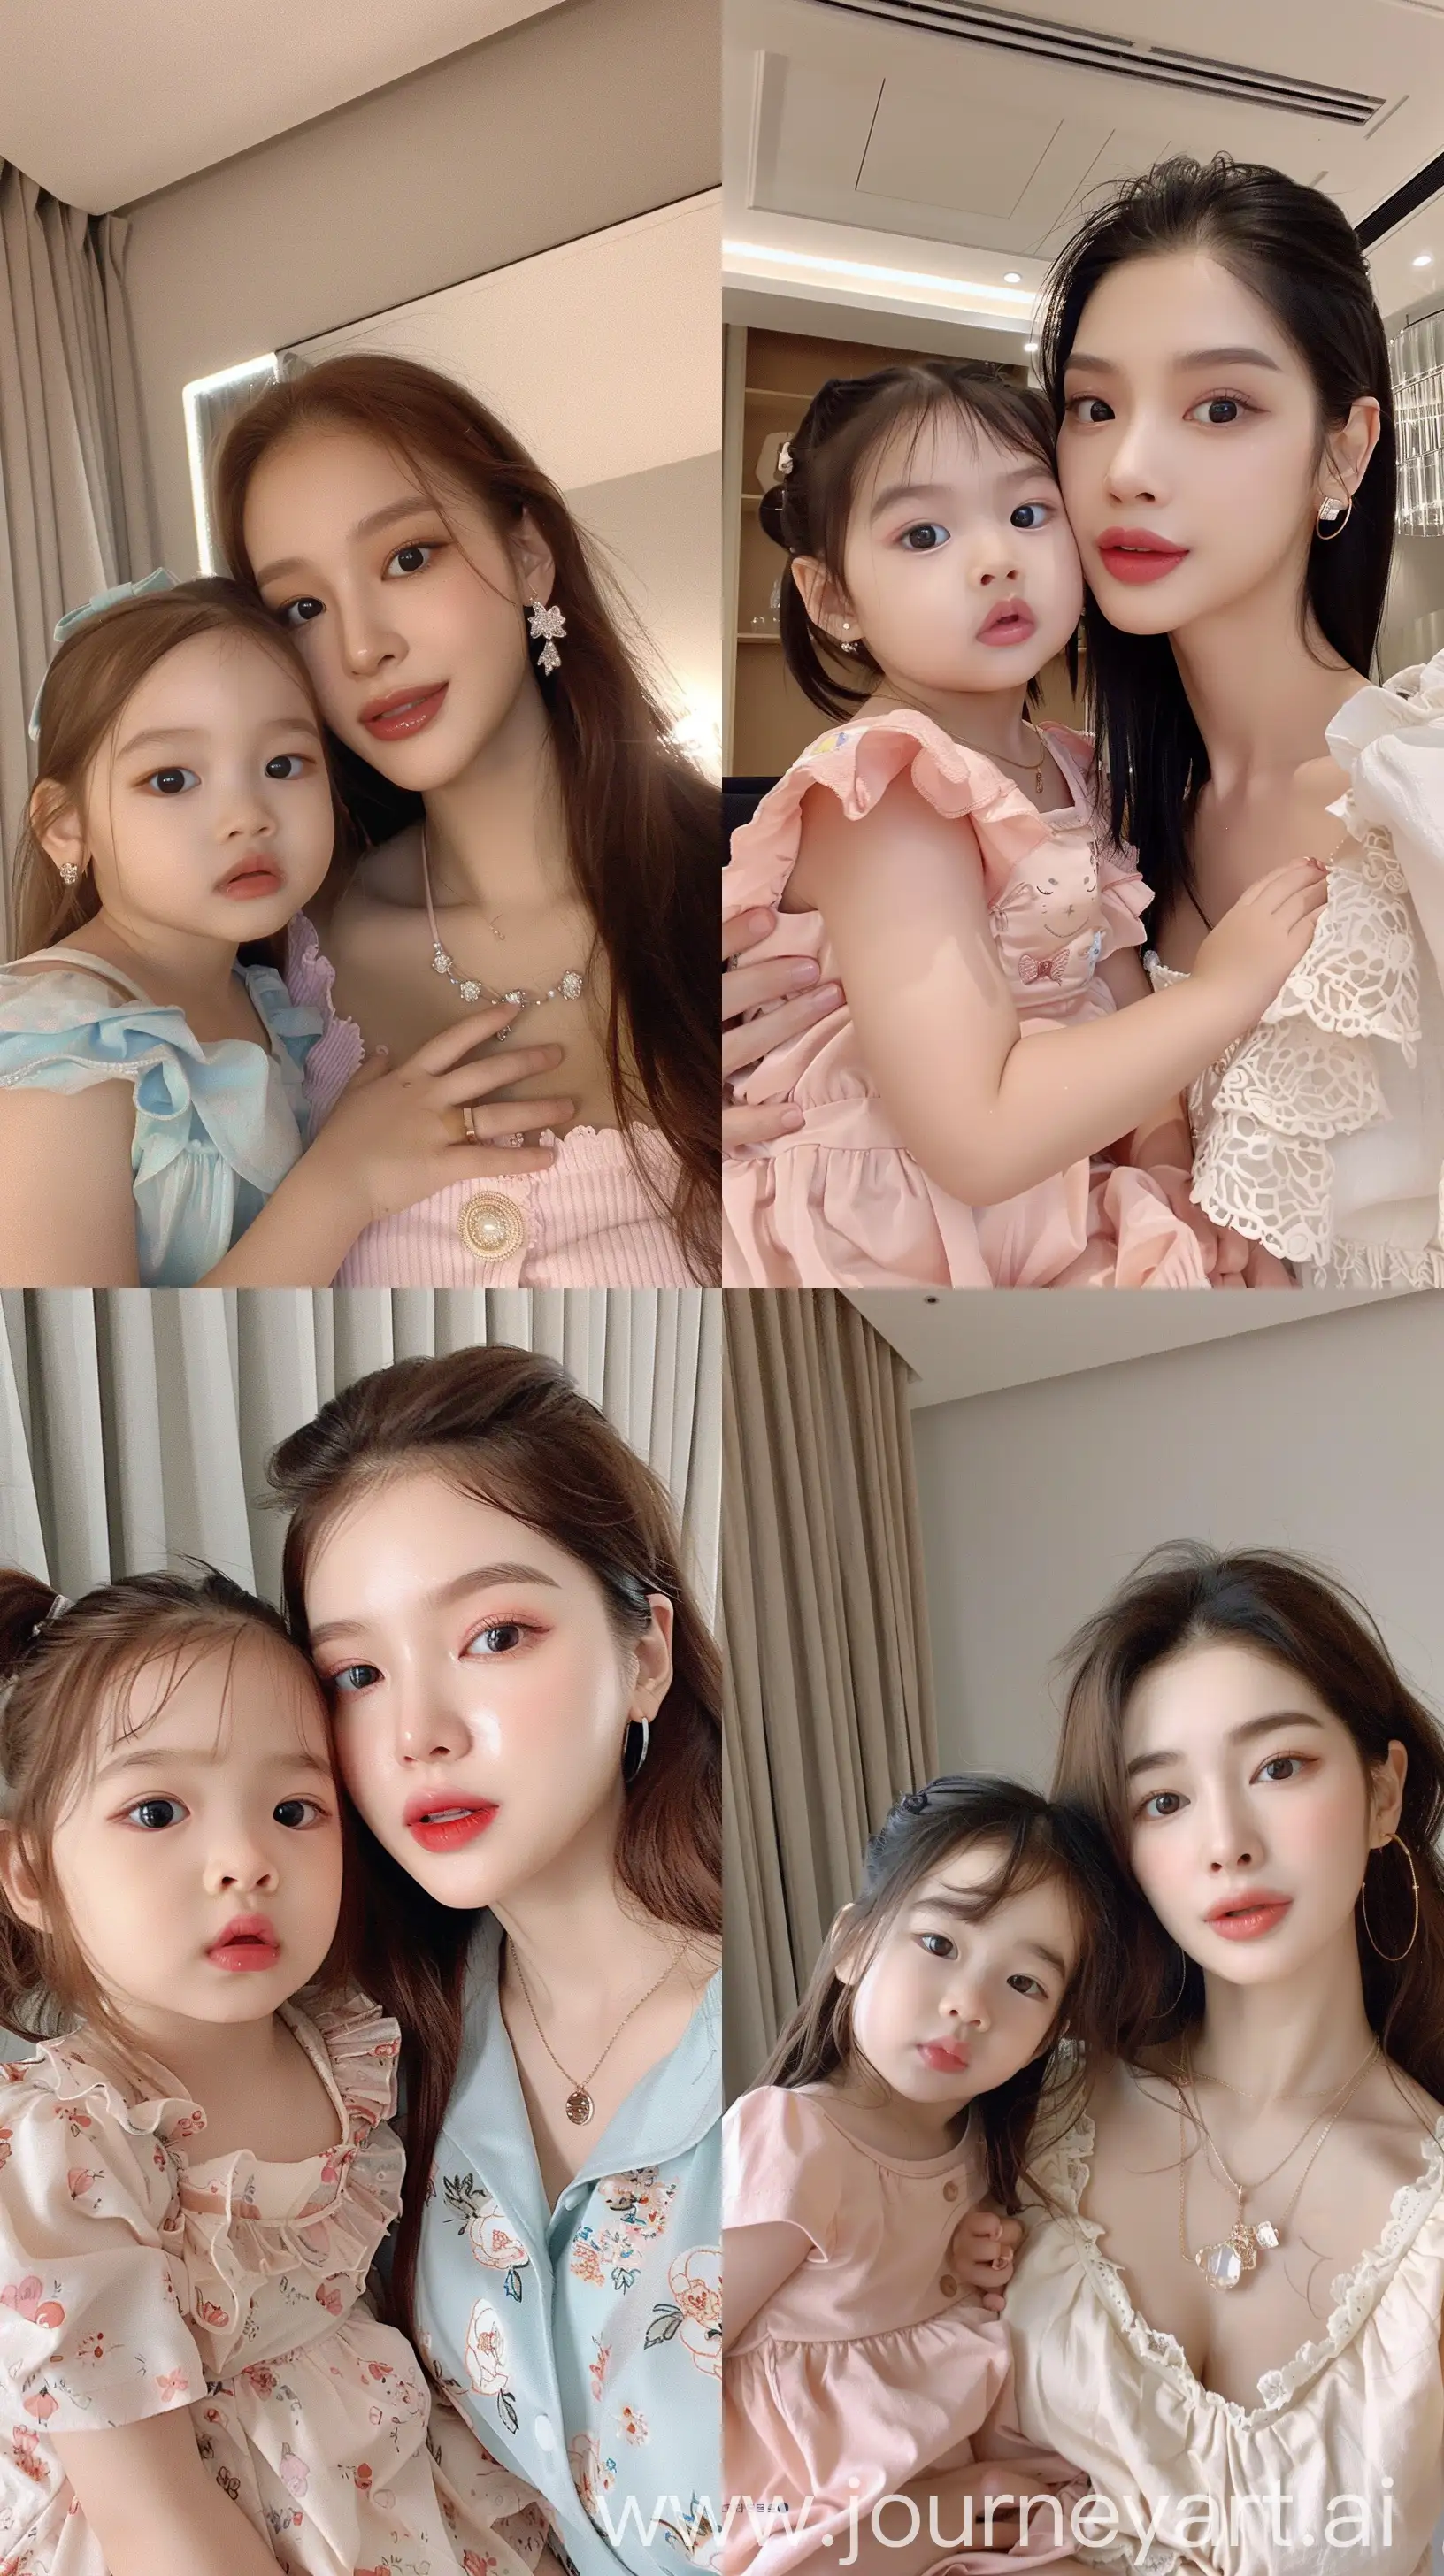 blackpink's jennie selfie with 2 years old  girl, facial feature look a like blackpink's jennie, aestethic selfie, wearing cute pastels outfit, night times, aestethic make up,hotly elegant young mom --ar 9:16 